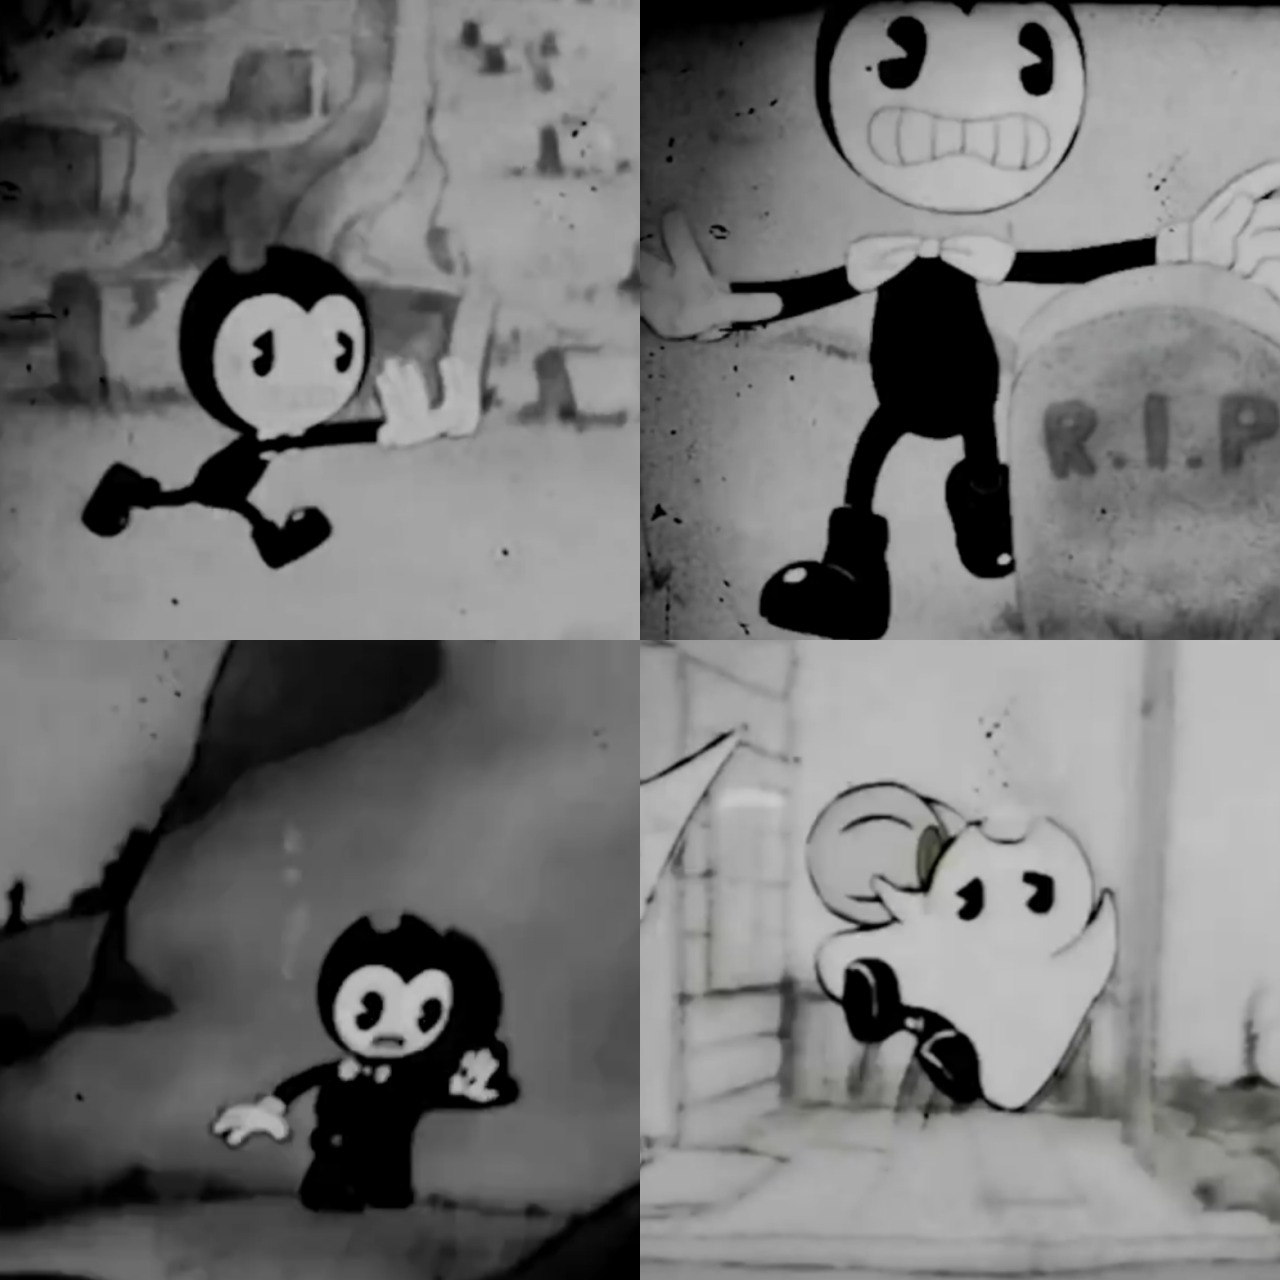 zealzealous - What we though Bendy was going to be like in the cartoons - A  tricky boiWhat